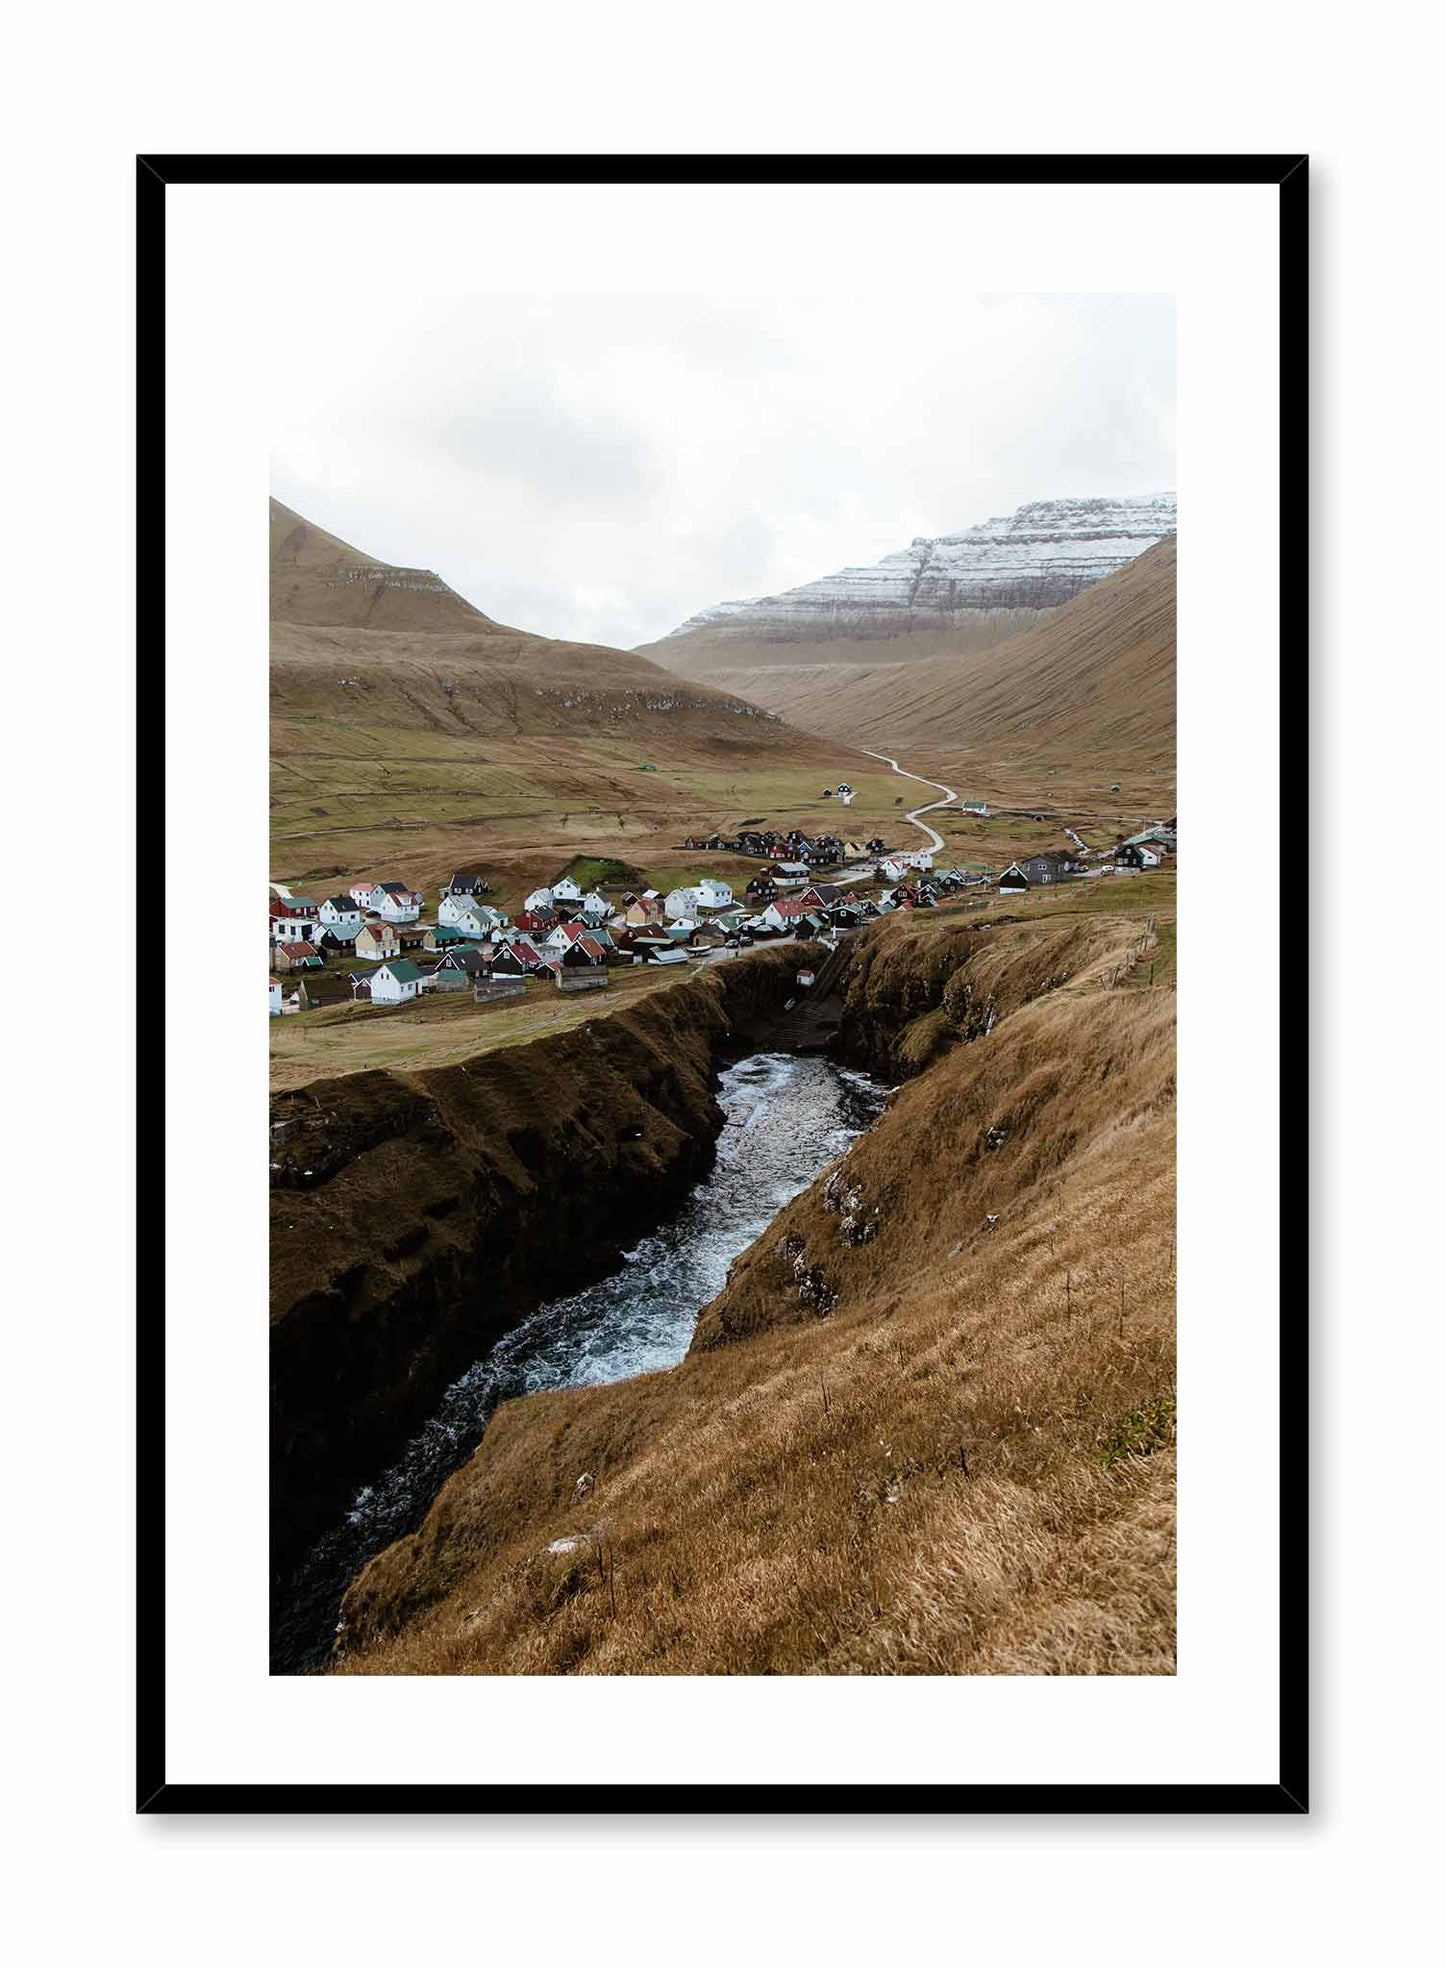 Home Among the Giants' is a landscape photography poster by Opposite Wall of a quaint Nordic village at the heart of tall mountains in the Faroe Islands.